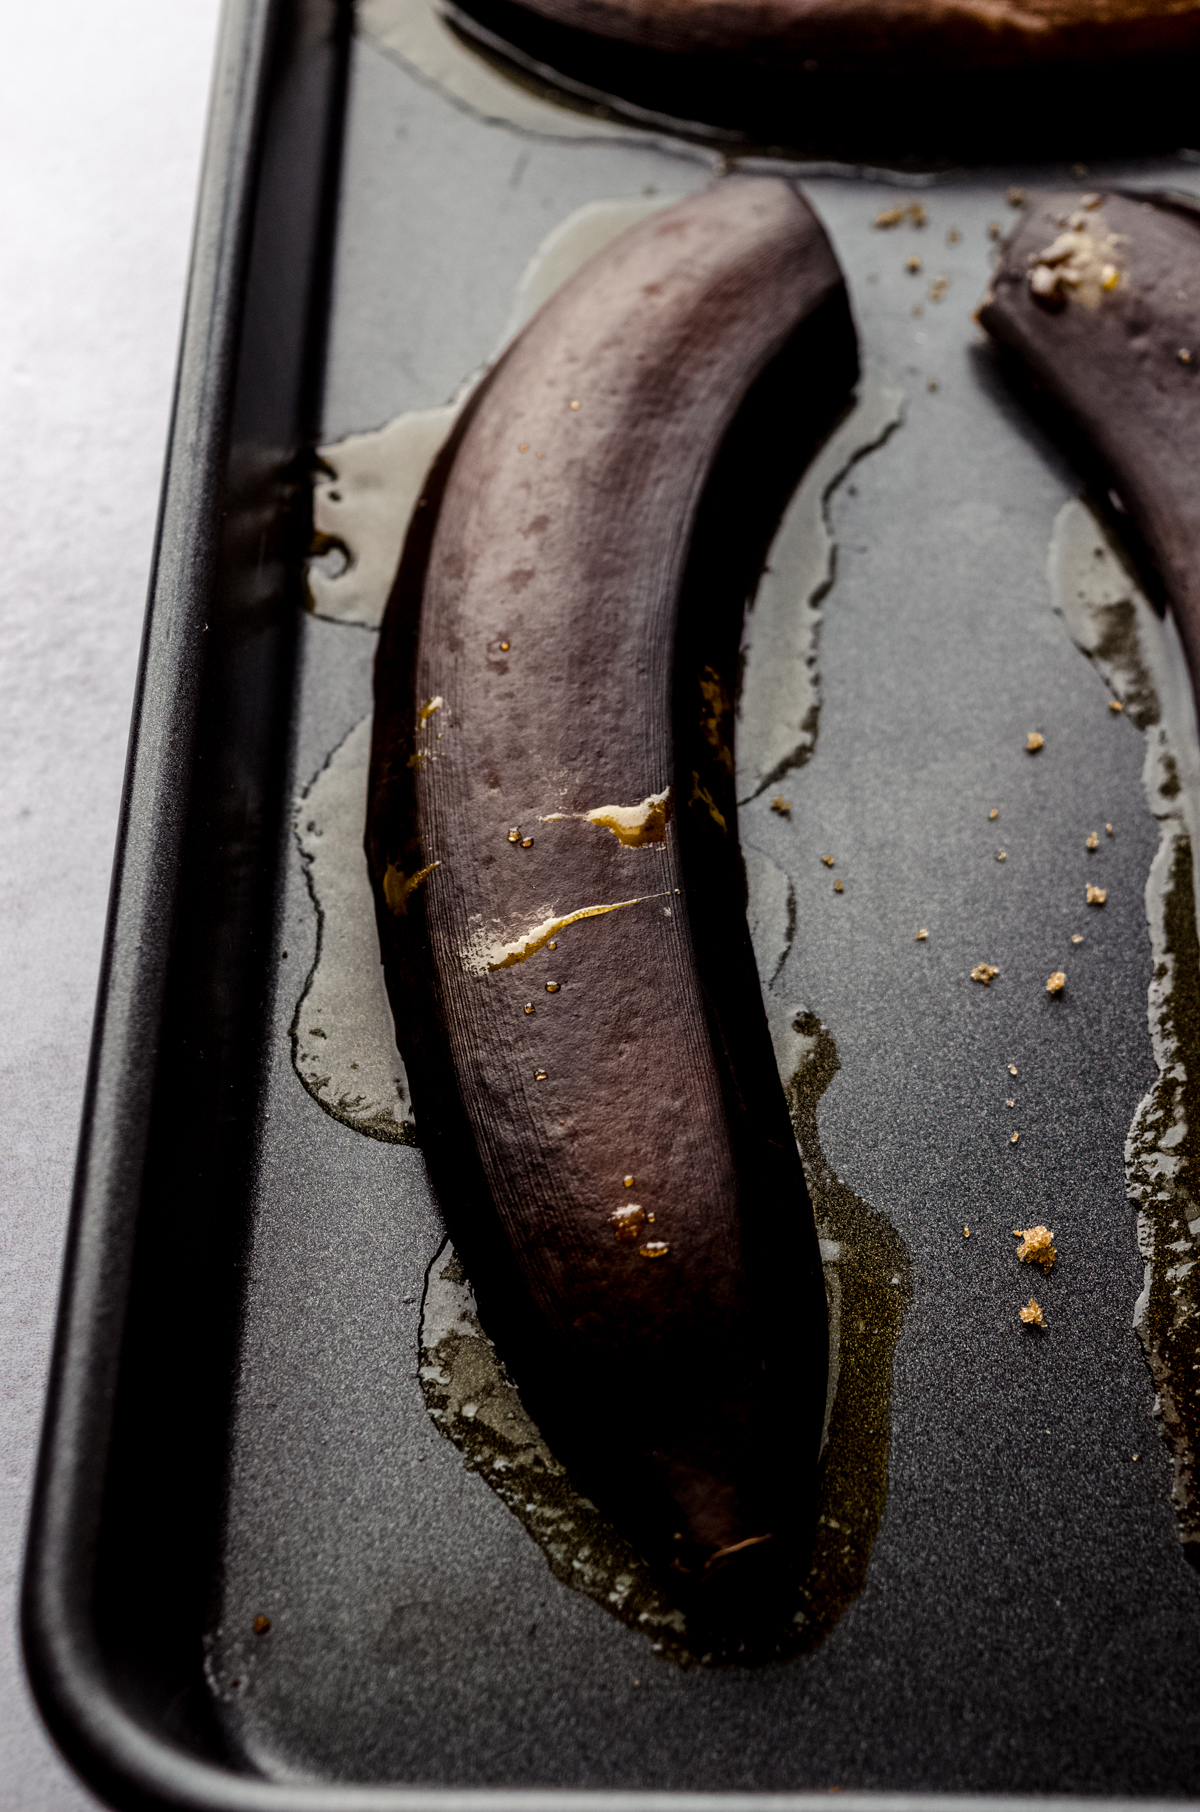 Baked bananas in the peel face down with sugary juices squishing out of the sides.